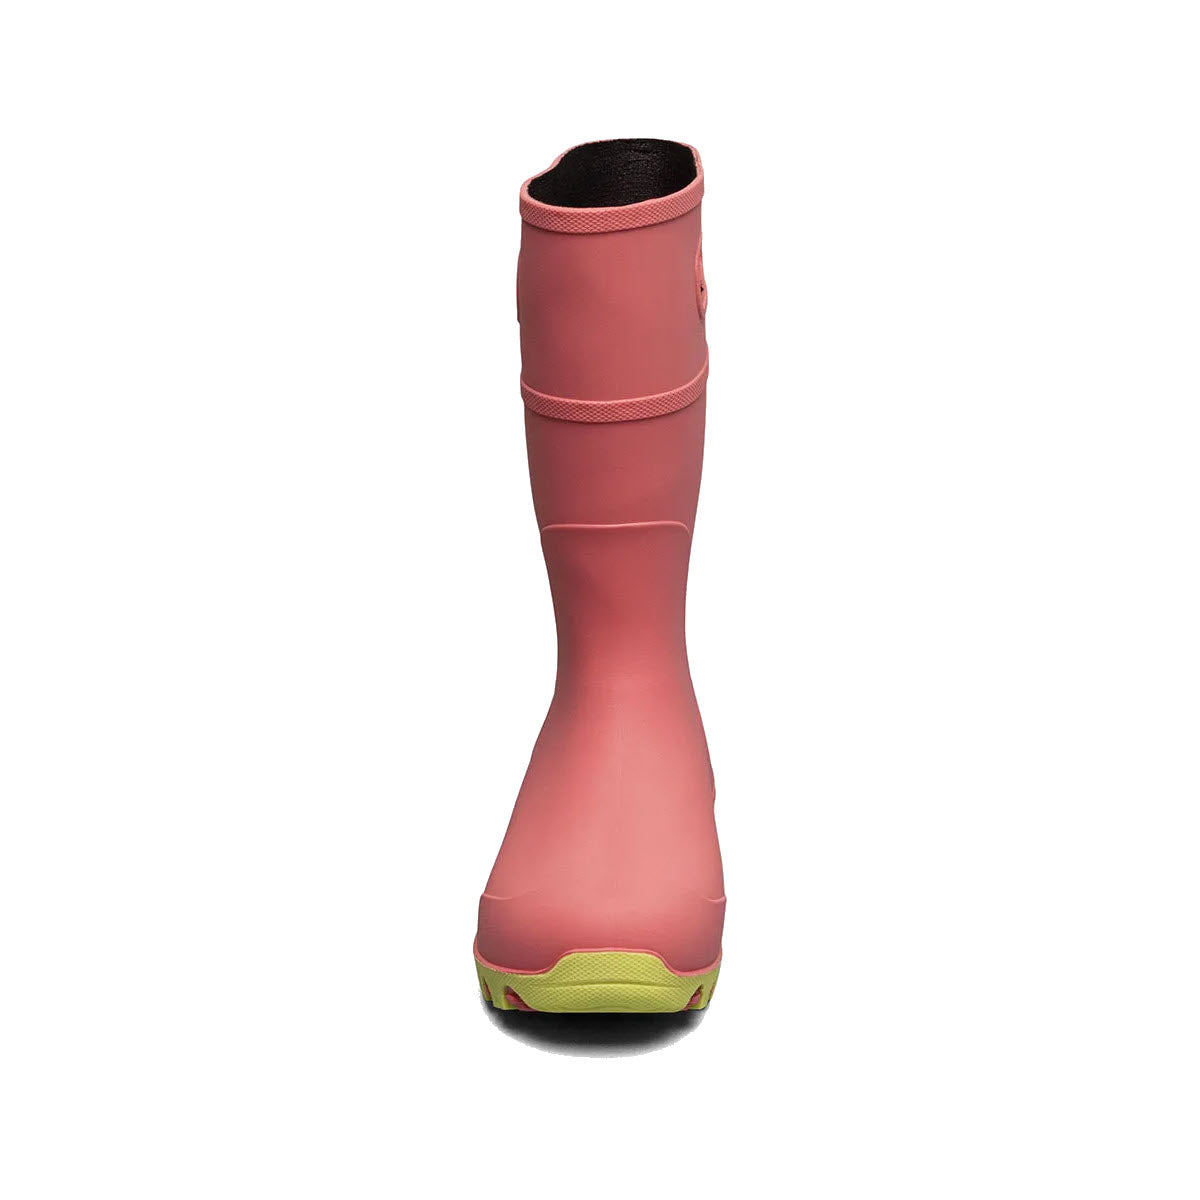 A single pink Bogs Essential Rain Tall boot viewed from the side, featuring a pull-on loop and green accents on the sole, with space-age seamless construction.